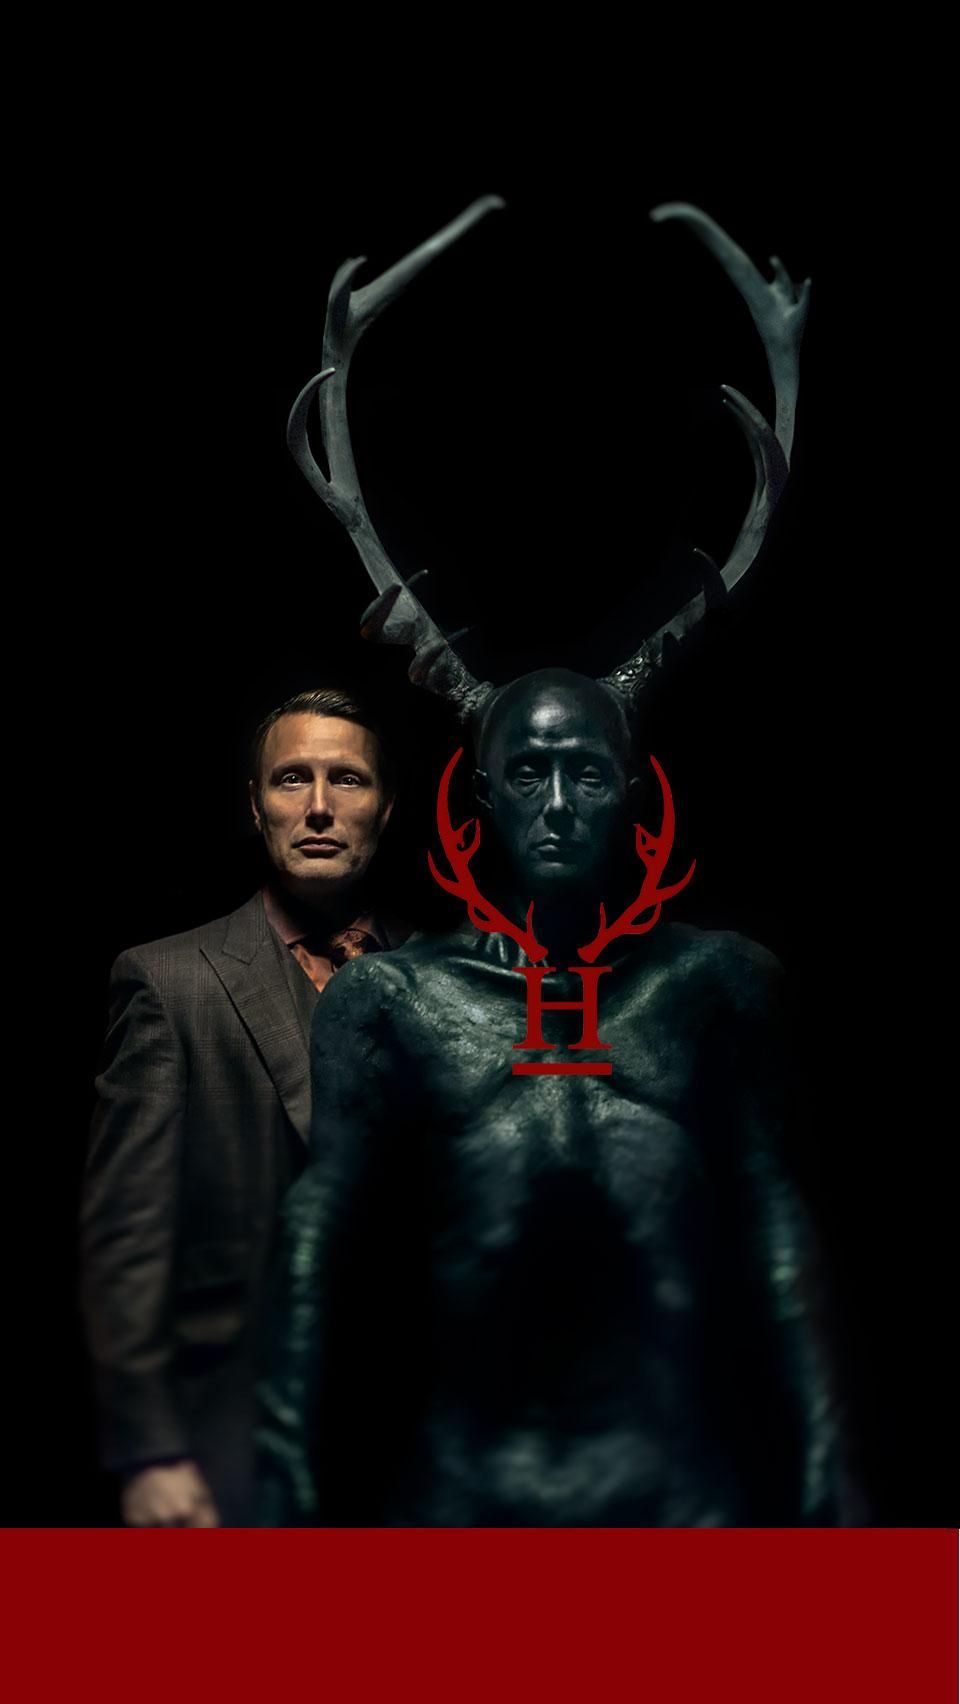 Bring Hannibal With You Wherever Go This Phone Wallpaper